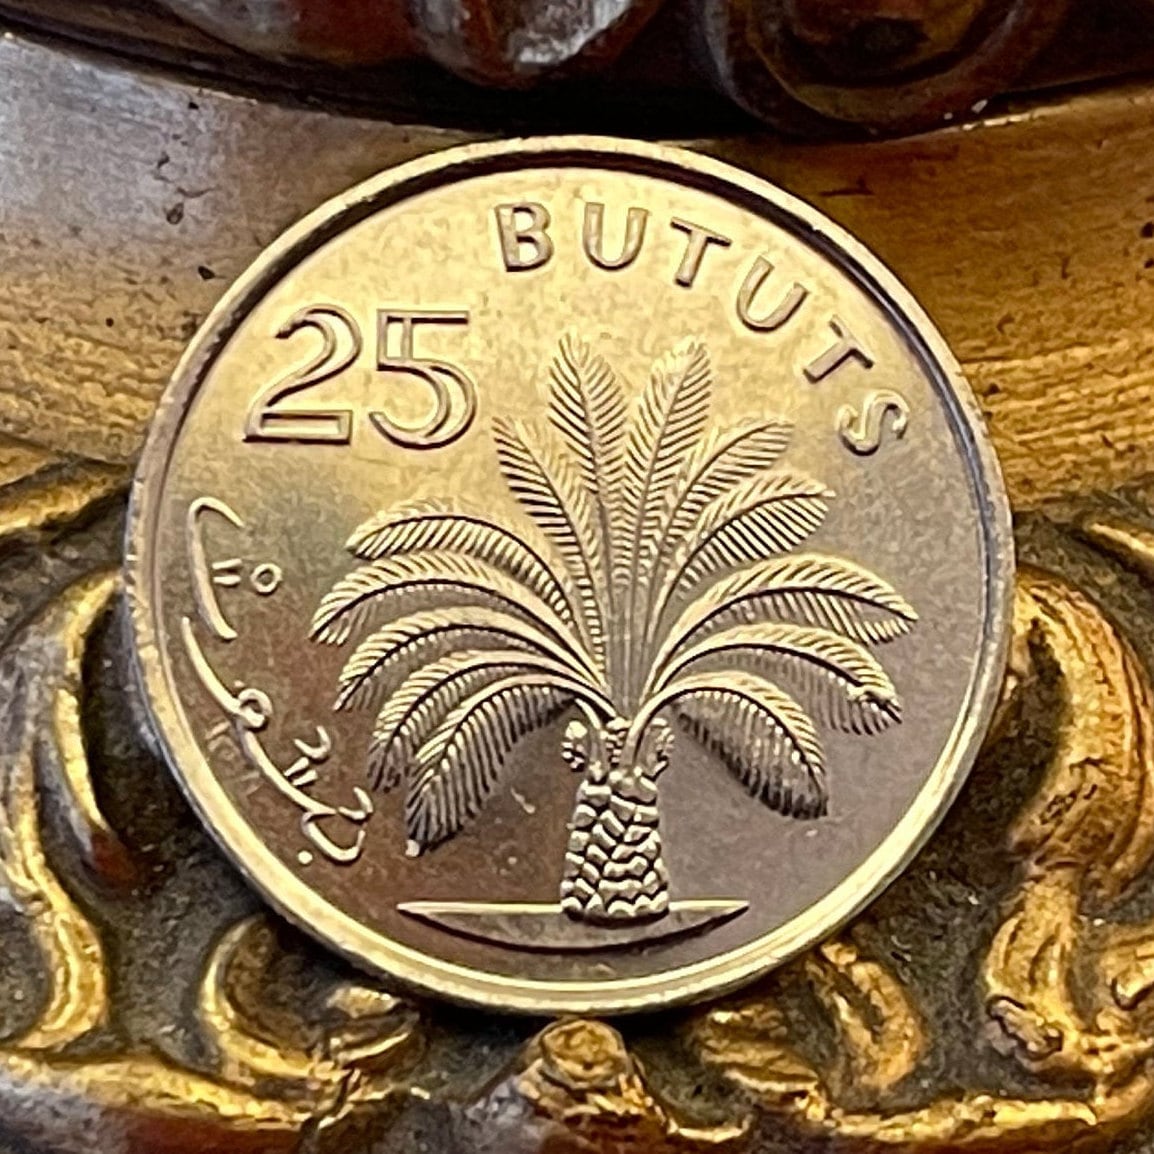 African Oil Palm 25 Bututs Gambia Authentic Coin Money for Jewelry and Craft Making (1998)